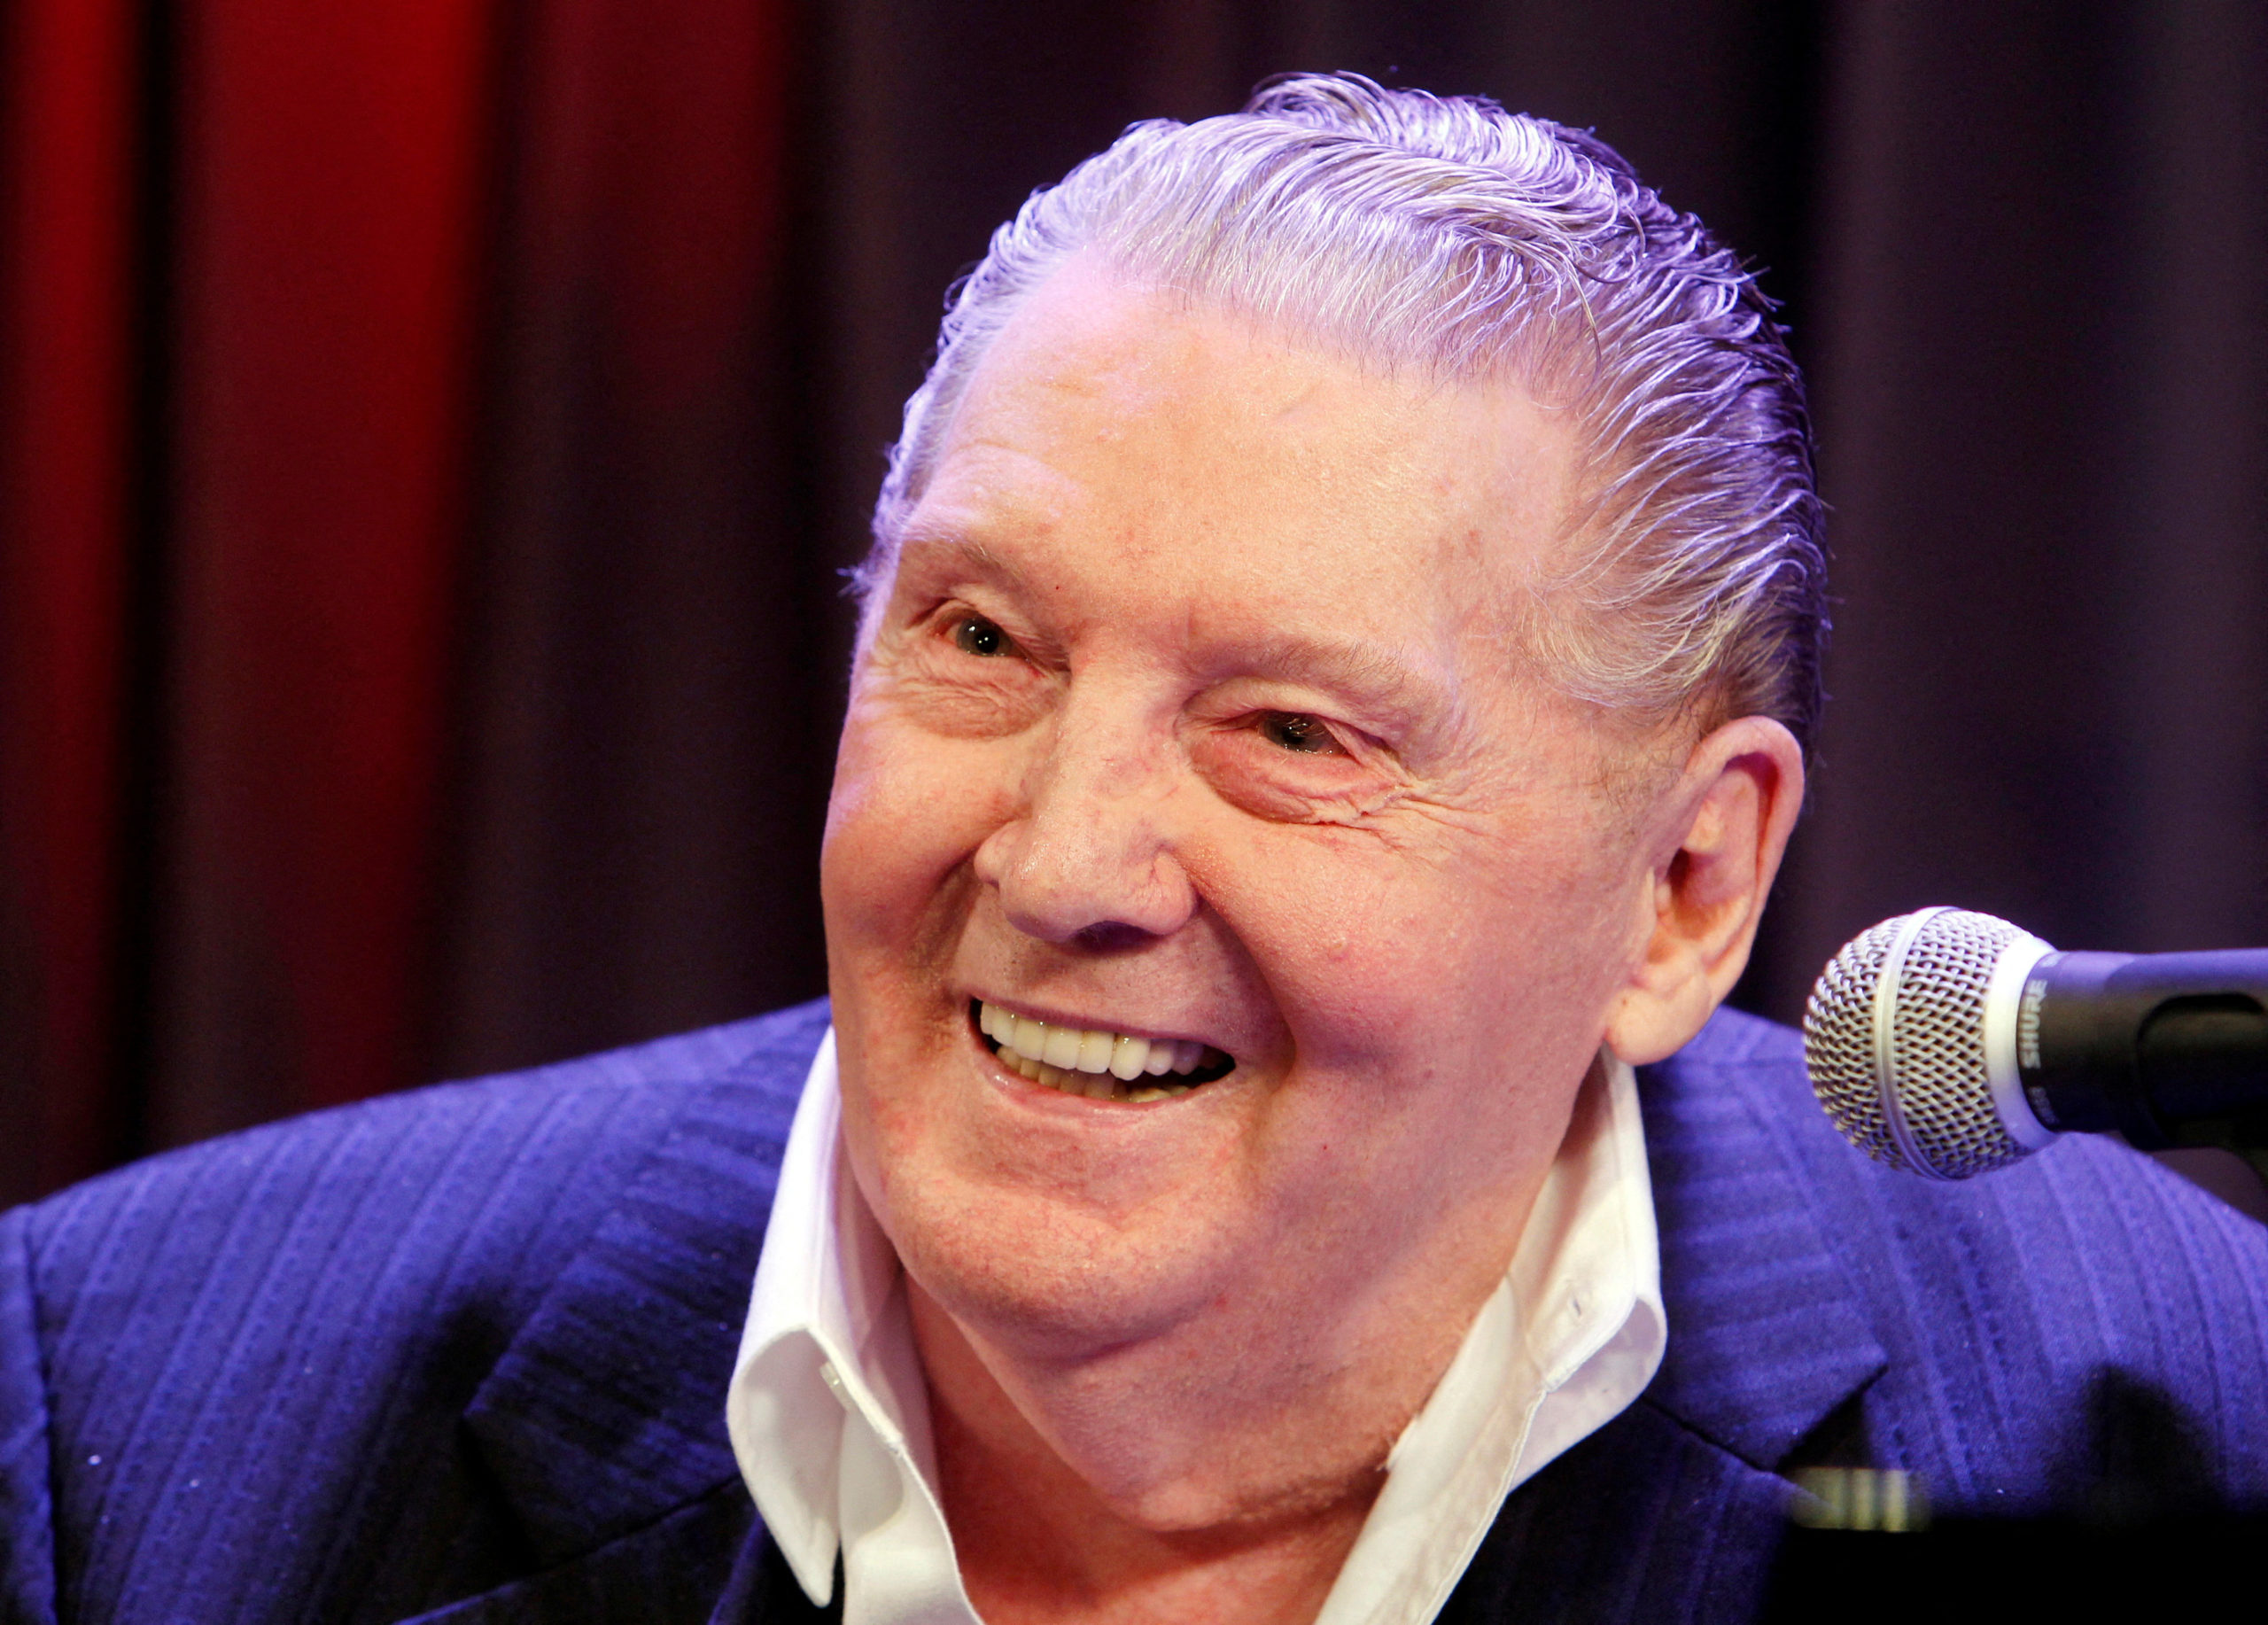 Singer Jerry Lee Lewis takes part in interviews before his appearance at "An Evening with Jerry Lee Lewis" at the Grammy Museum in Los Angeles September 28, 2010.  REUTERS/Fred Prouser/File Photo